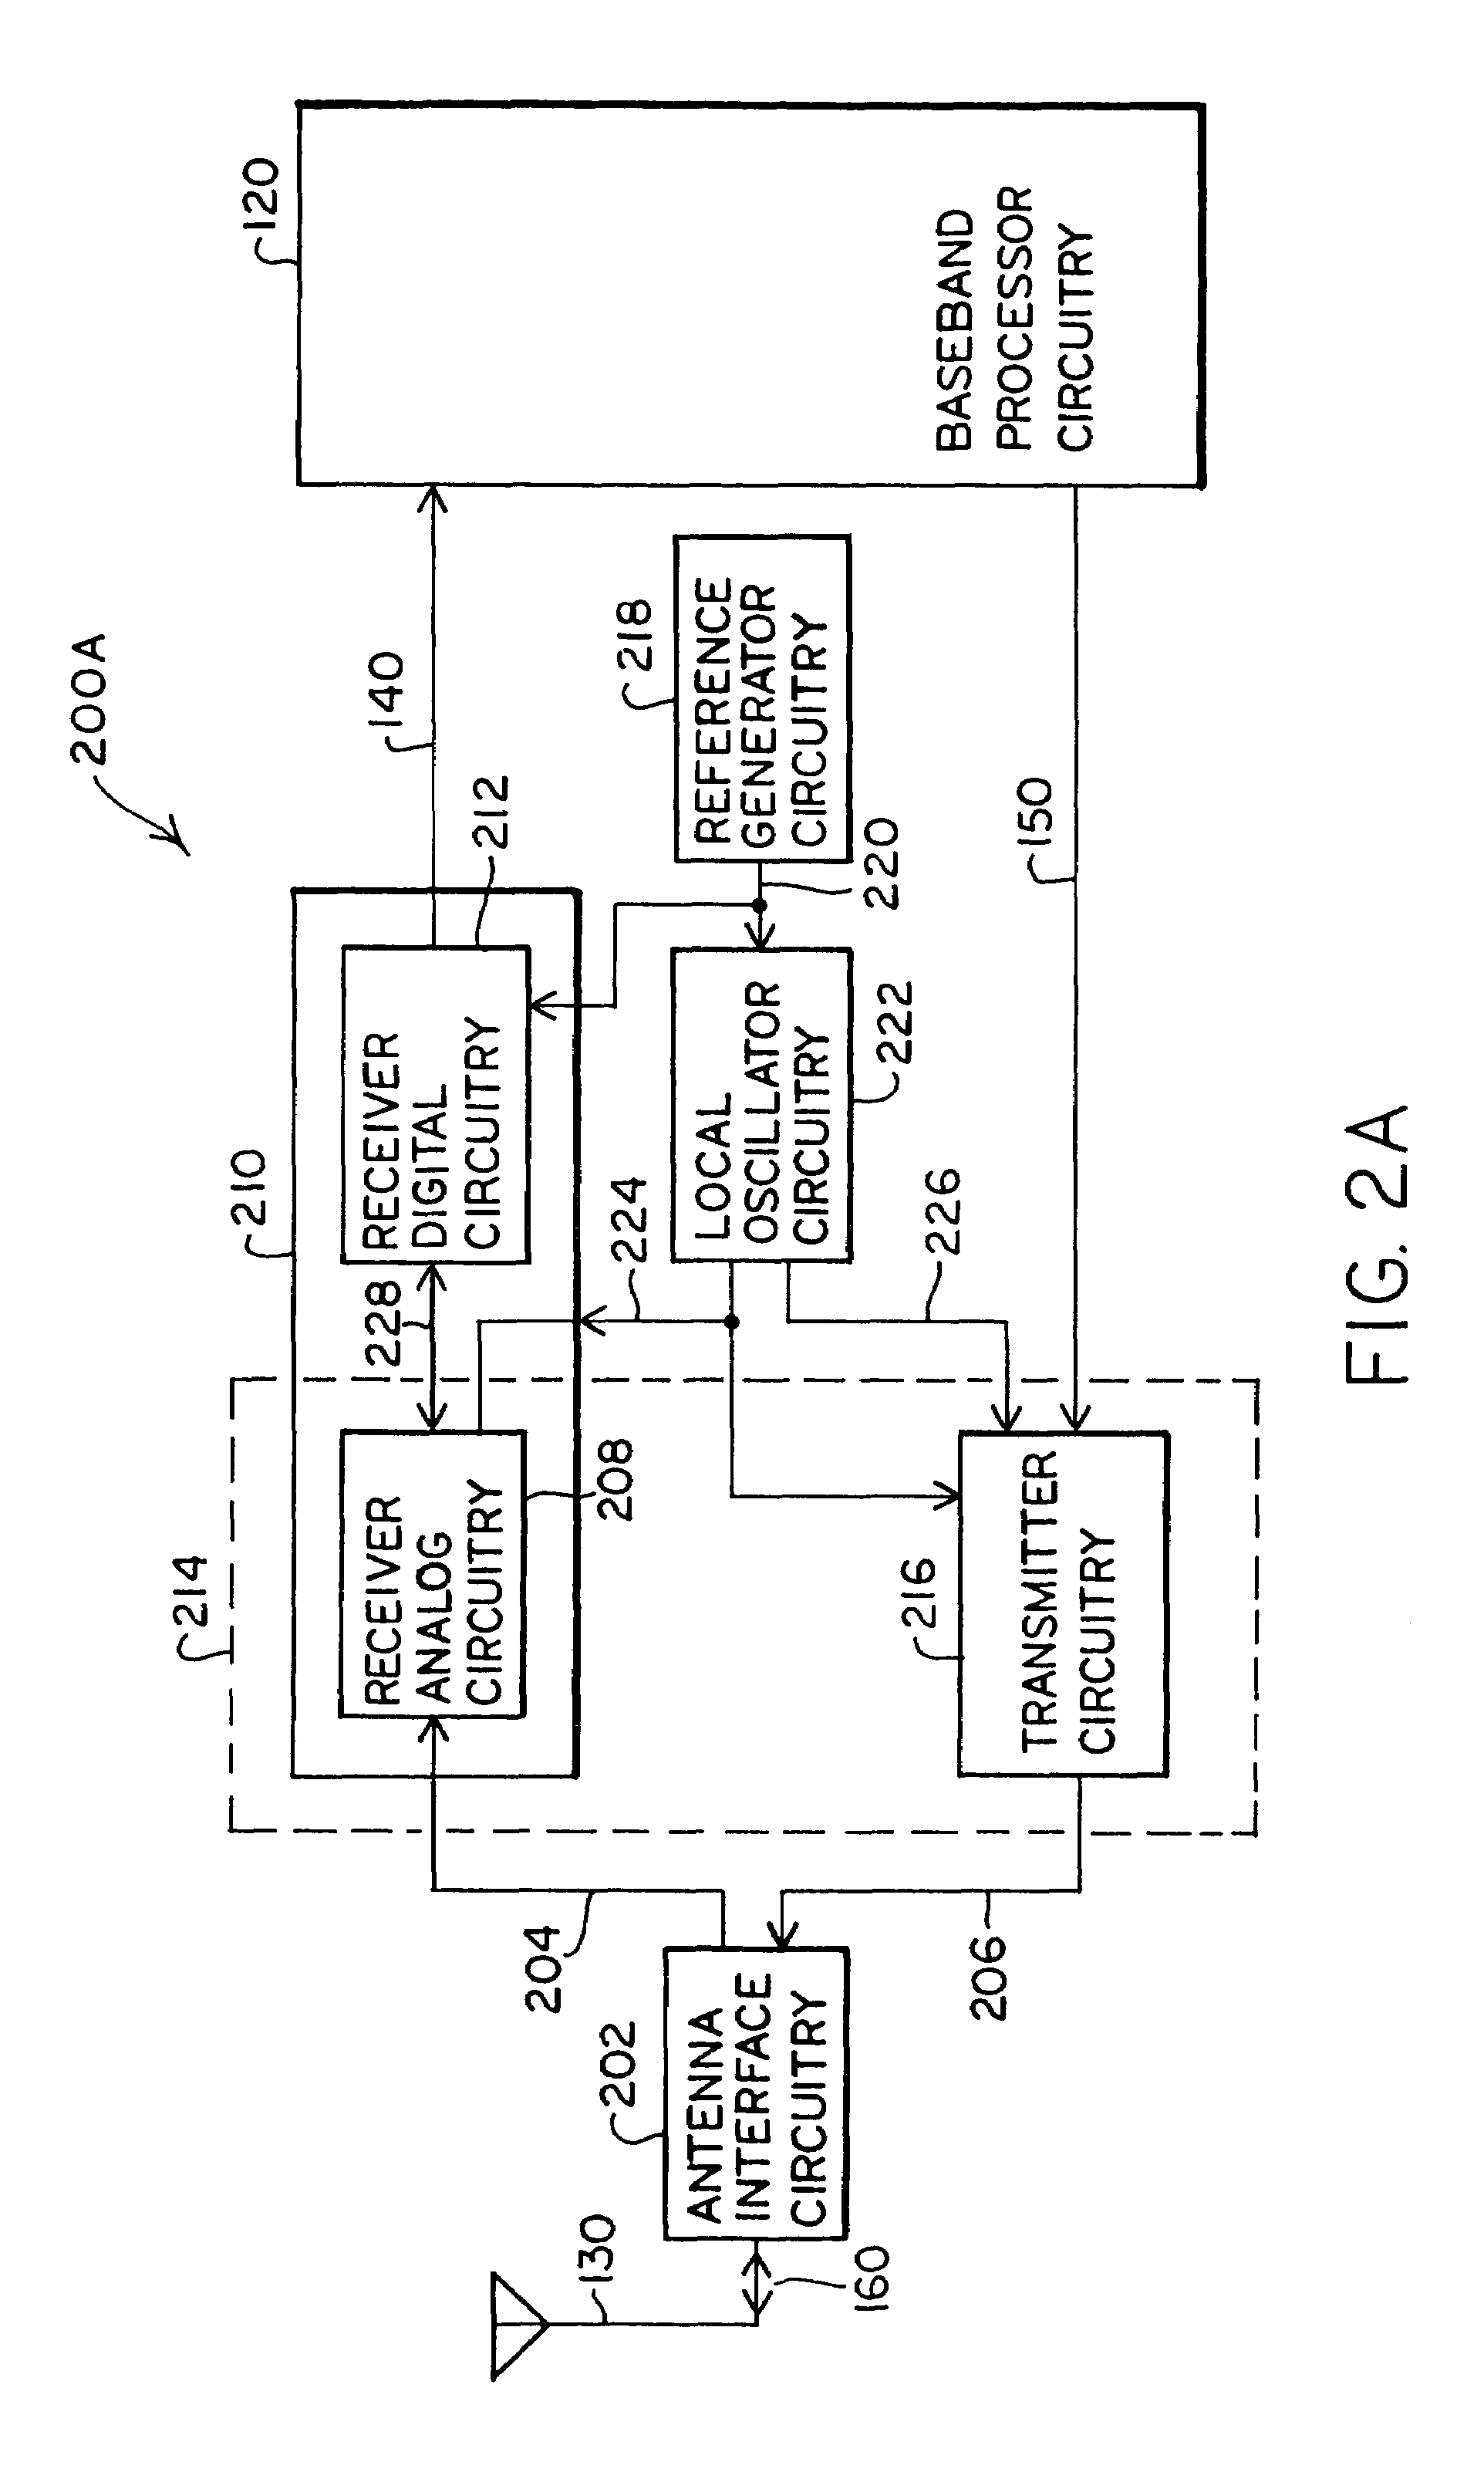 Partitioned radio-frequency apparatus and associated methods